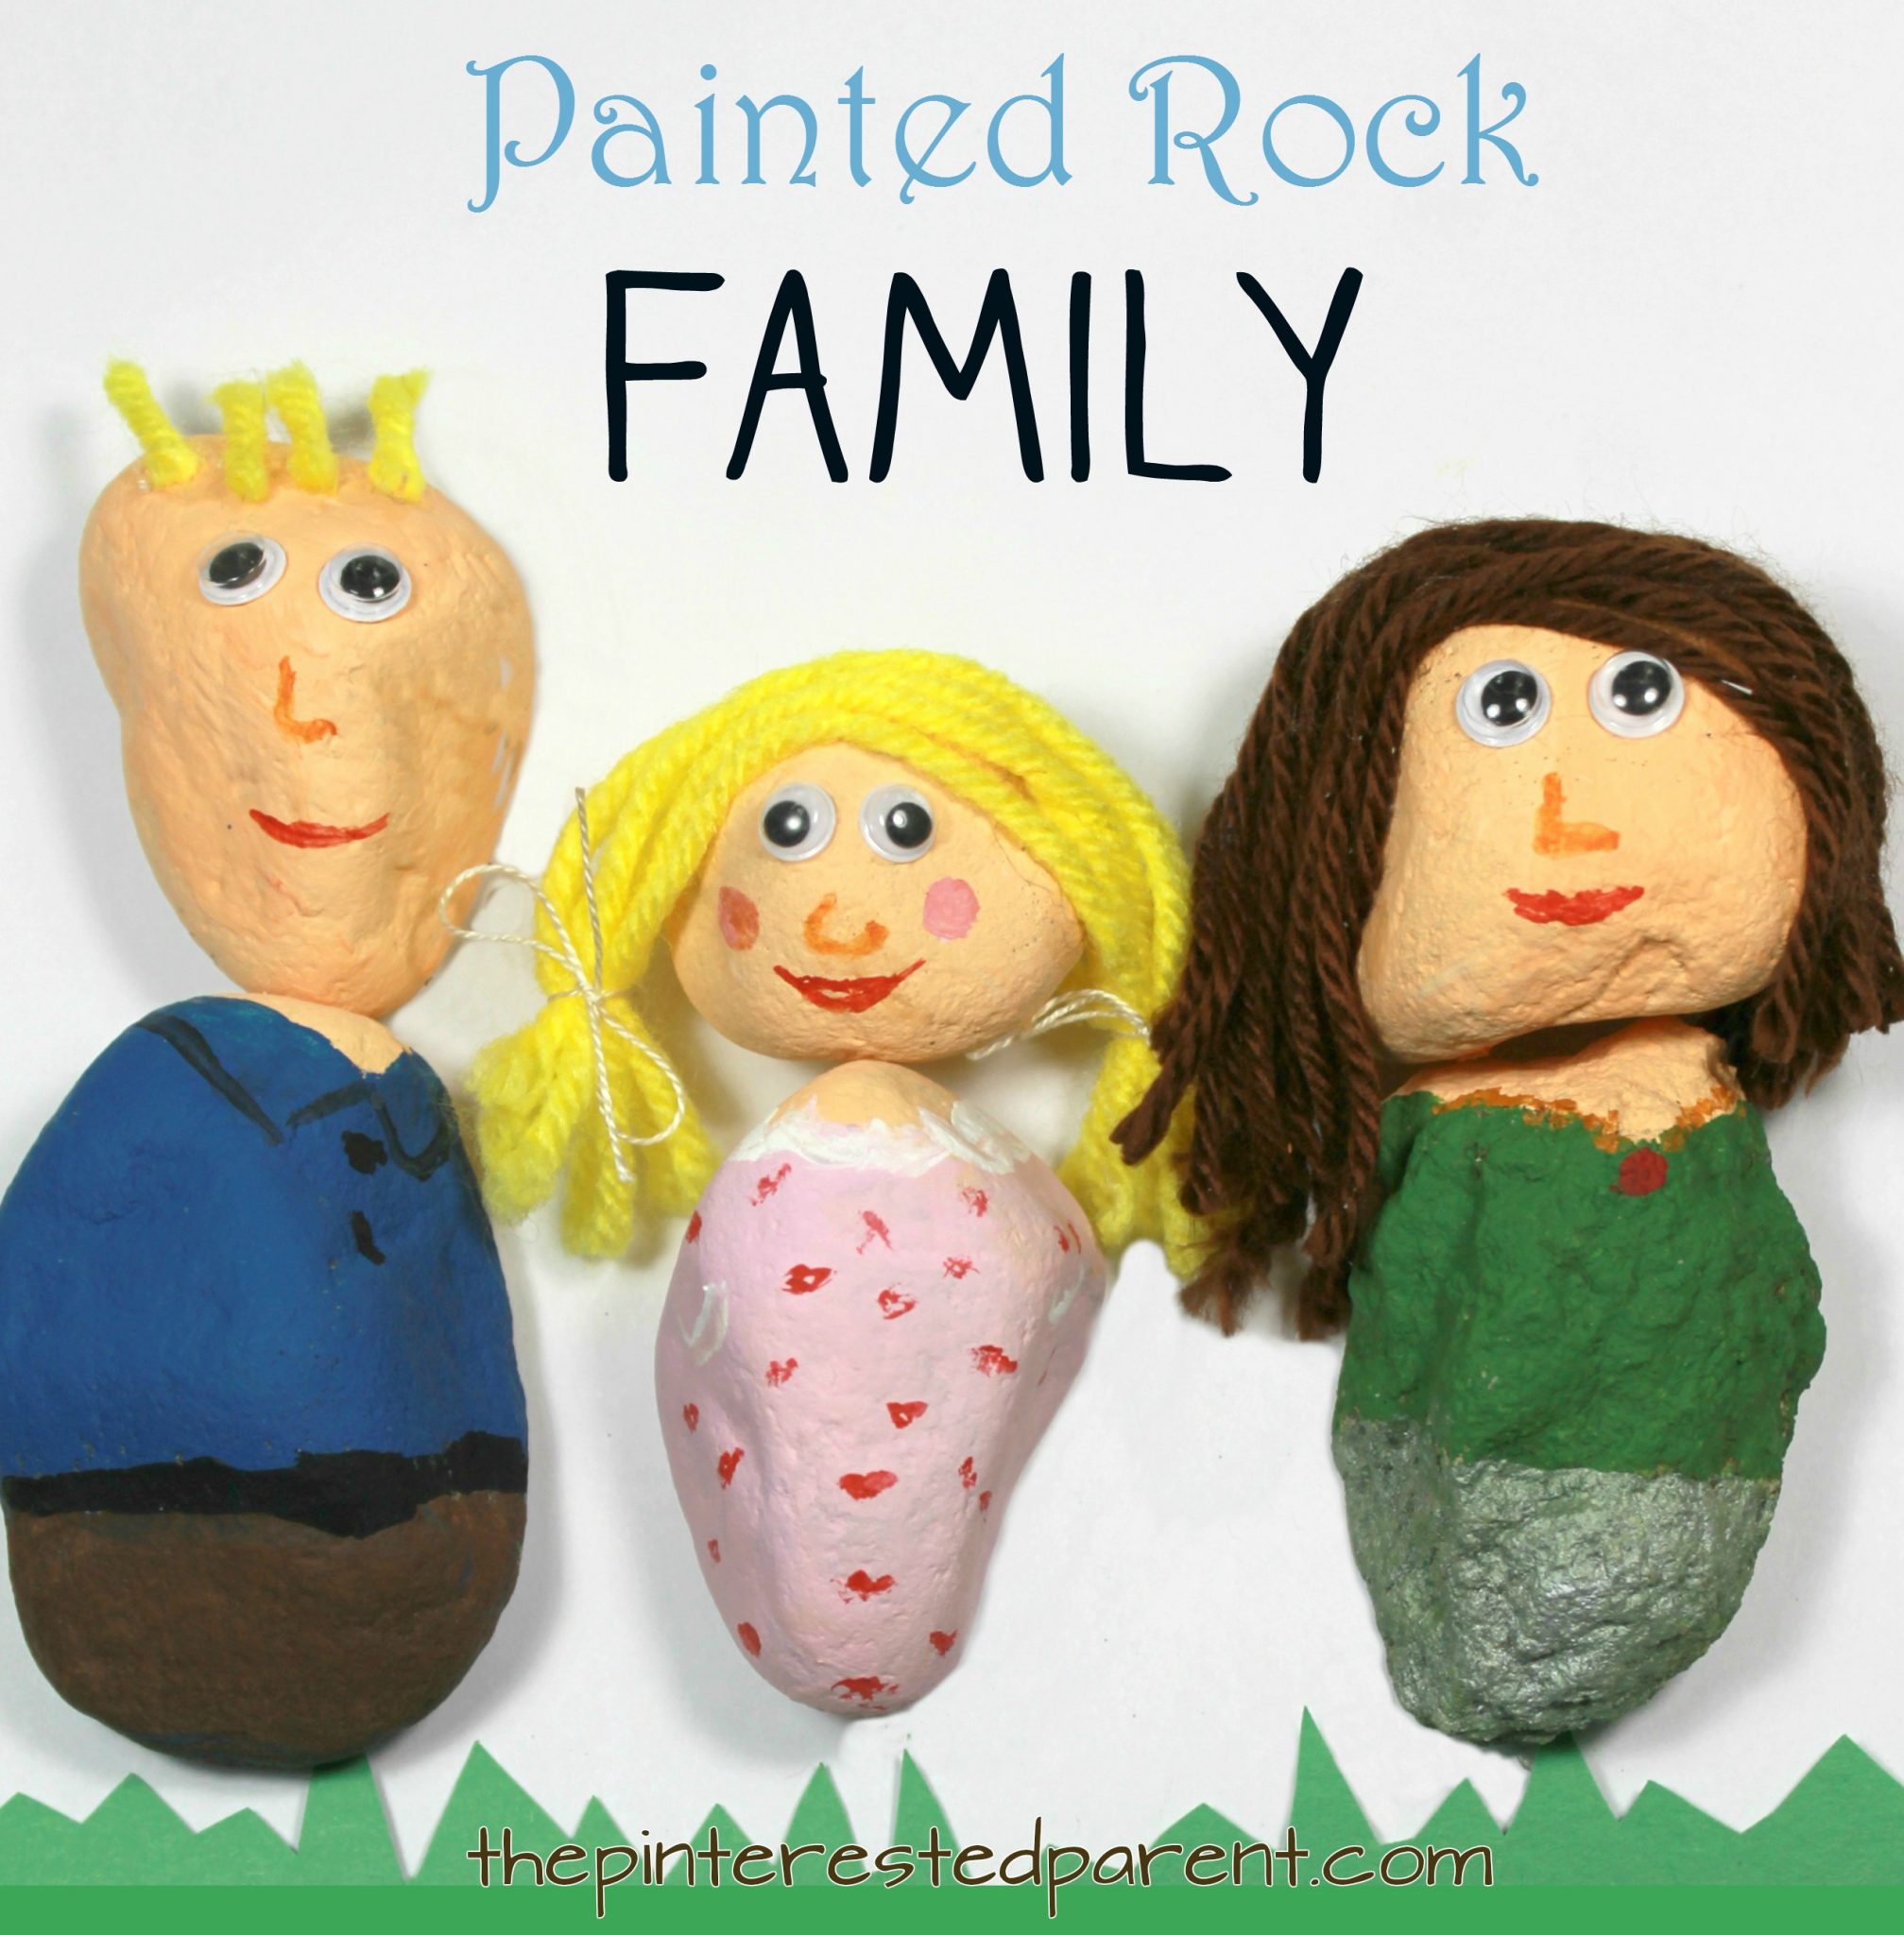 Painted Rock Family - Paint your family or make mix and match people with simple canvases from nature. Arts and craft projects for kids